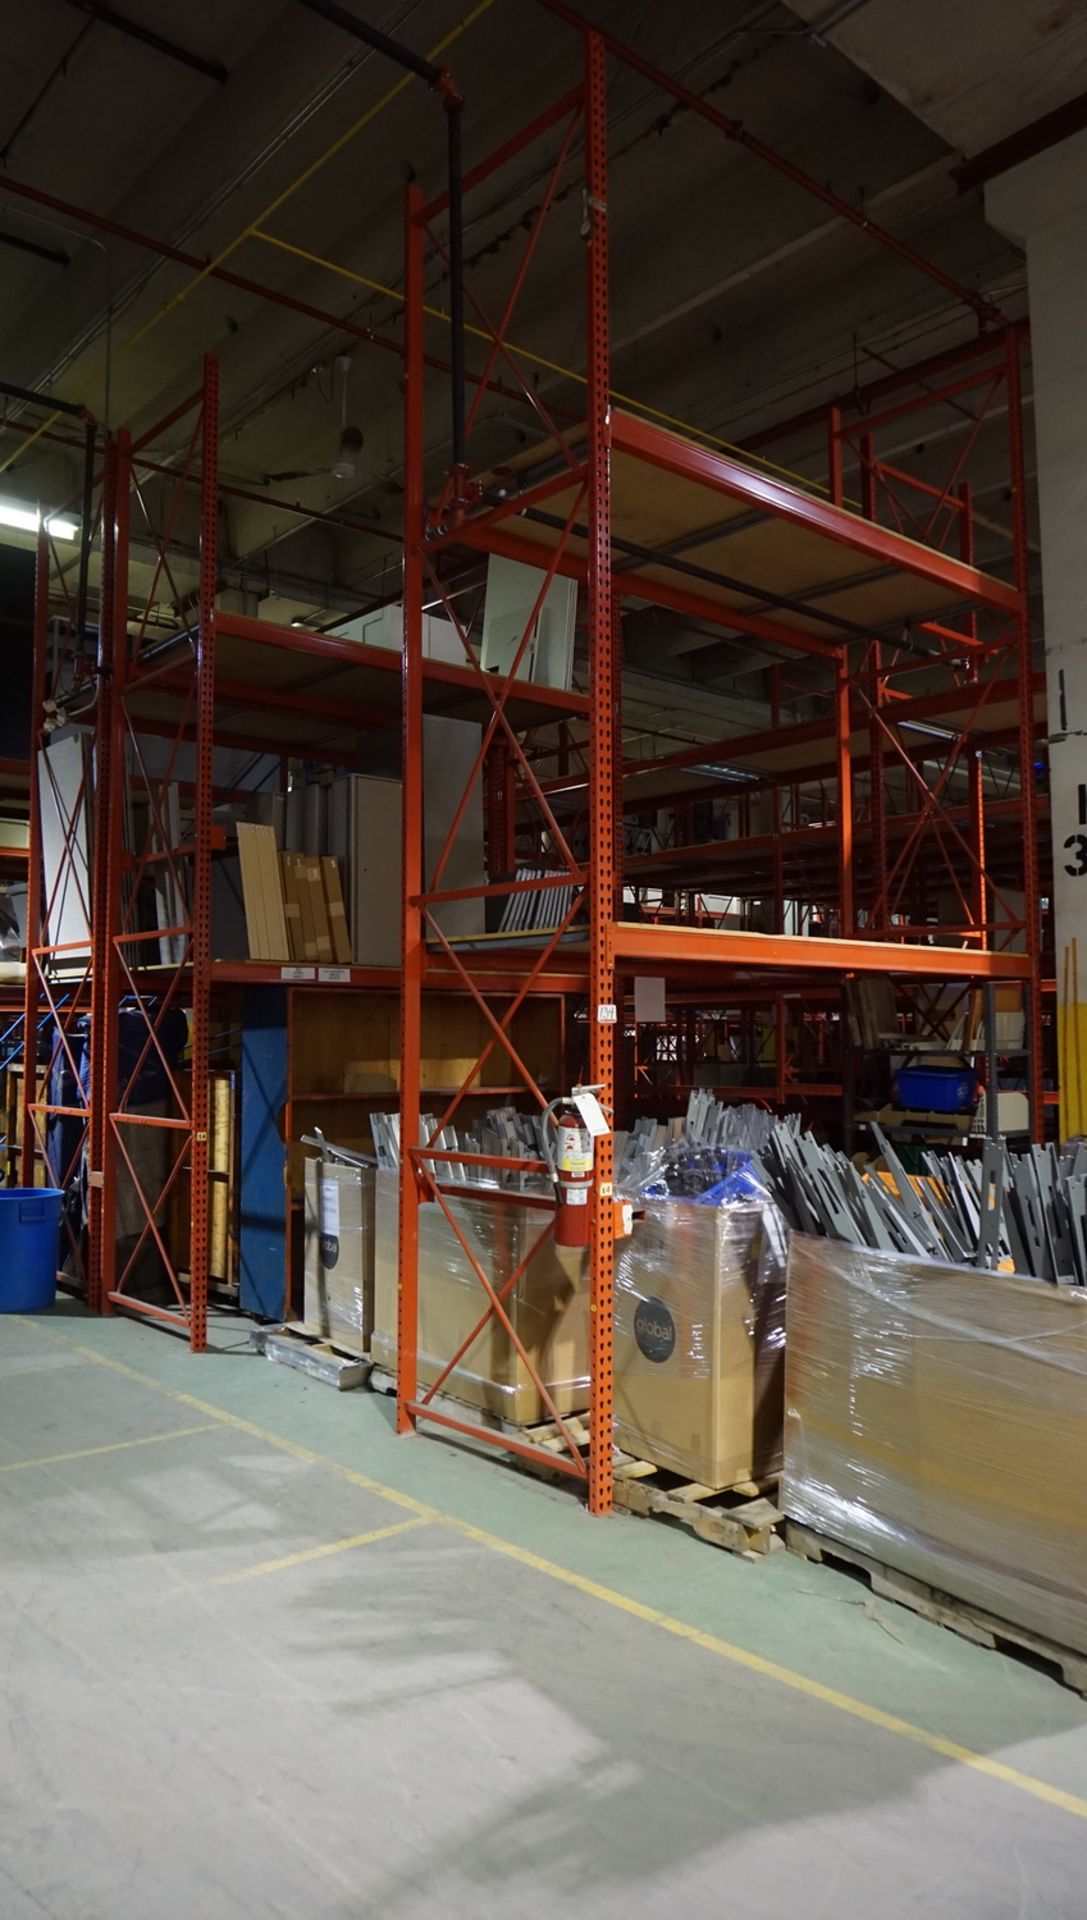 SECTIONS - ORANGE STEEL 4' X 12' X 18'H PALLET RACKING (12 UPRIGHTS & 28 STRINGERS TOTAL) C/W MDF